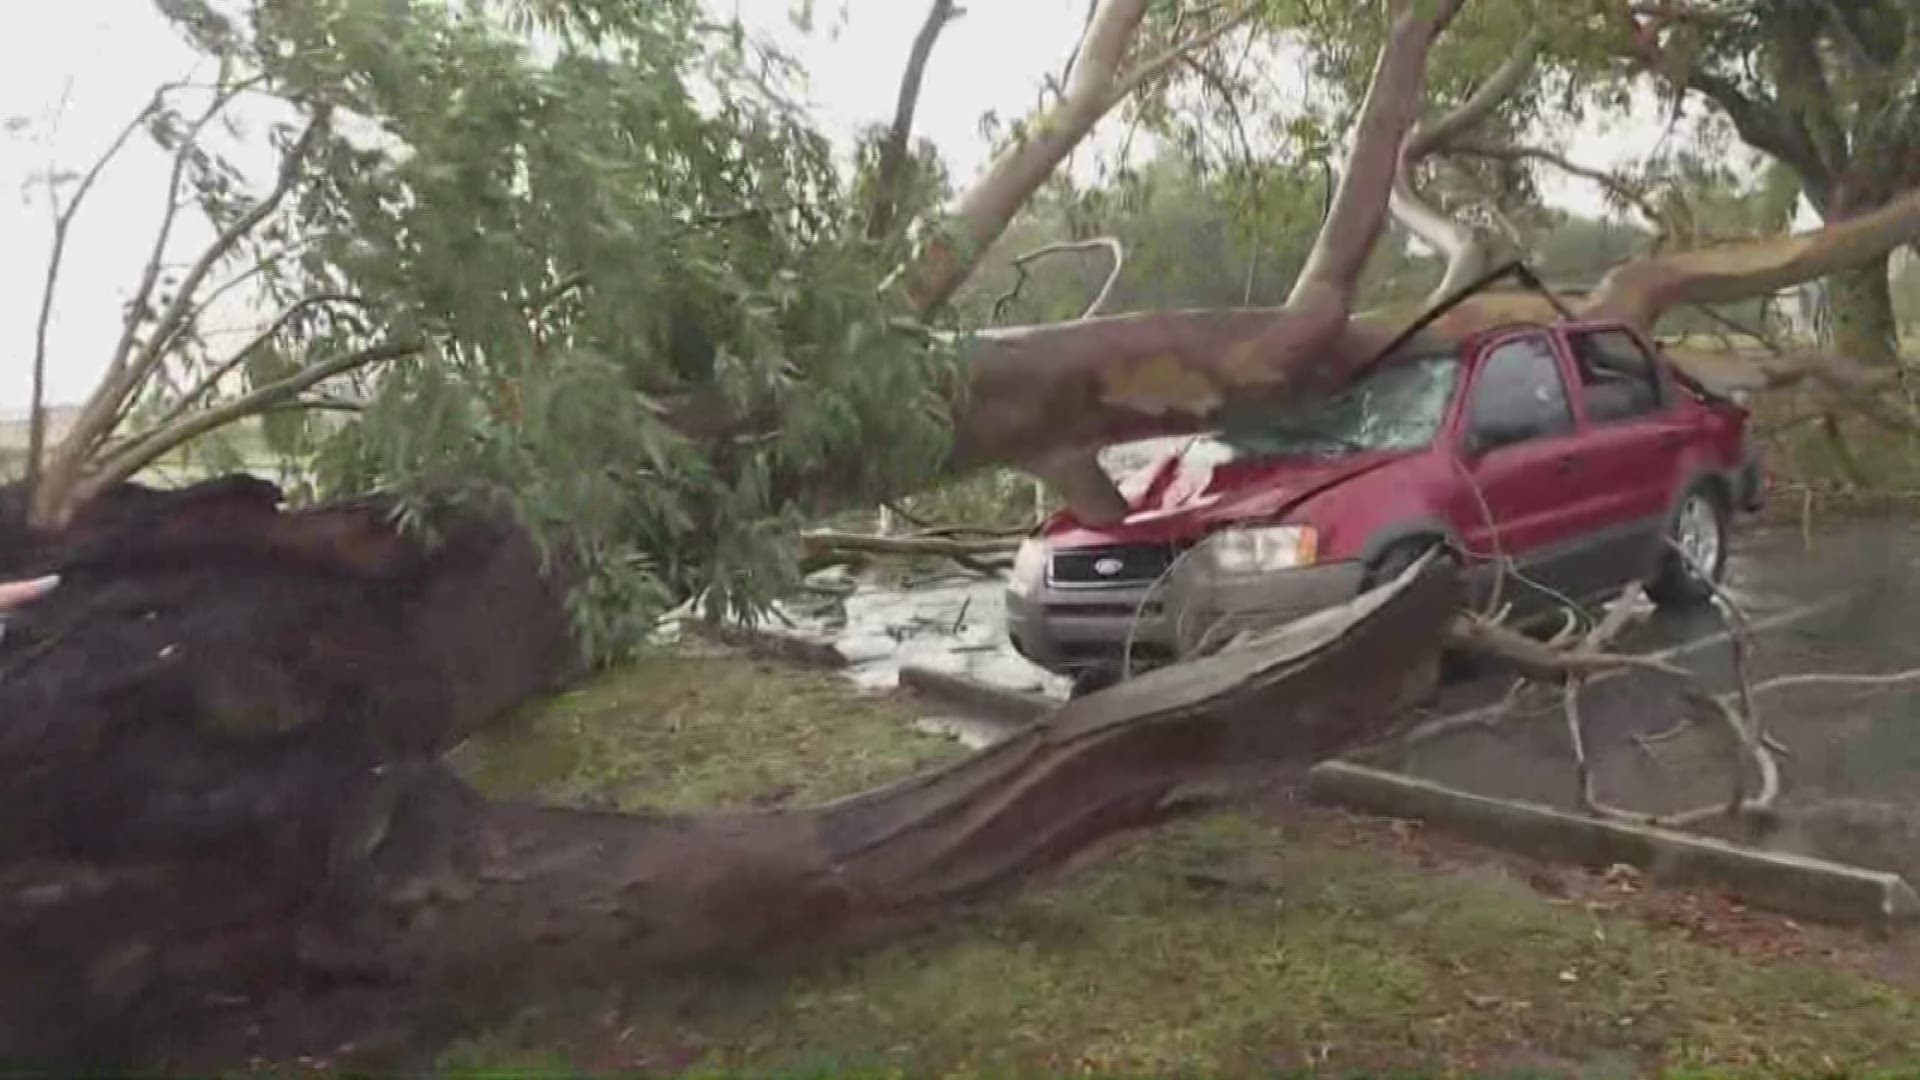 There have been reports of damage across Tampa Bay as severe weather rolls through. A tree fell on a Ford Escape at the Rogers Park Golf Course in Tampa. No one was injured.